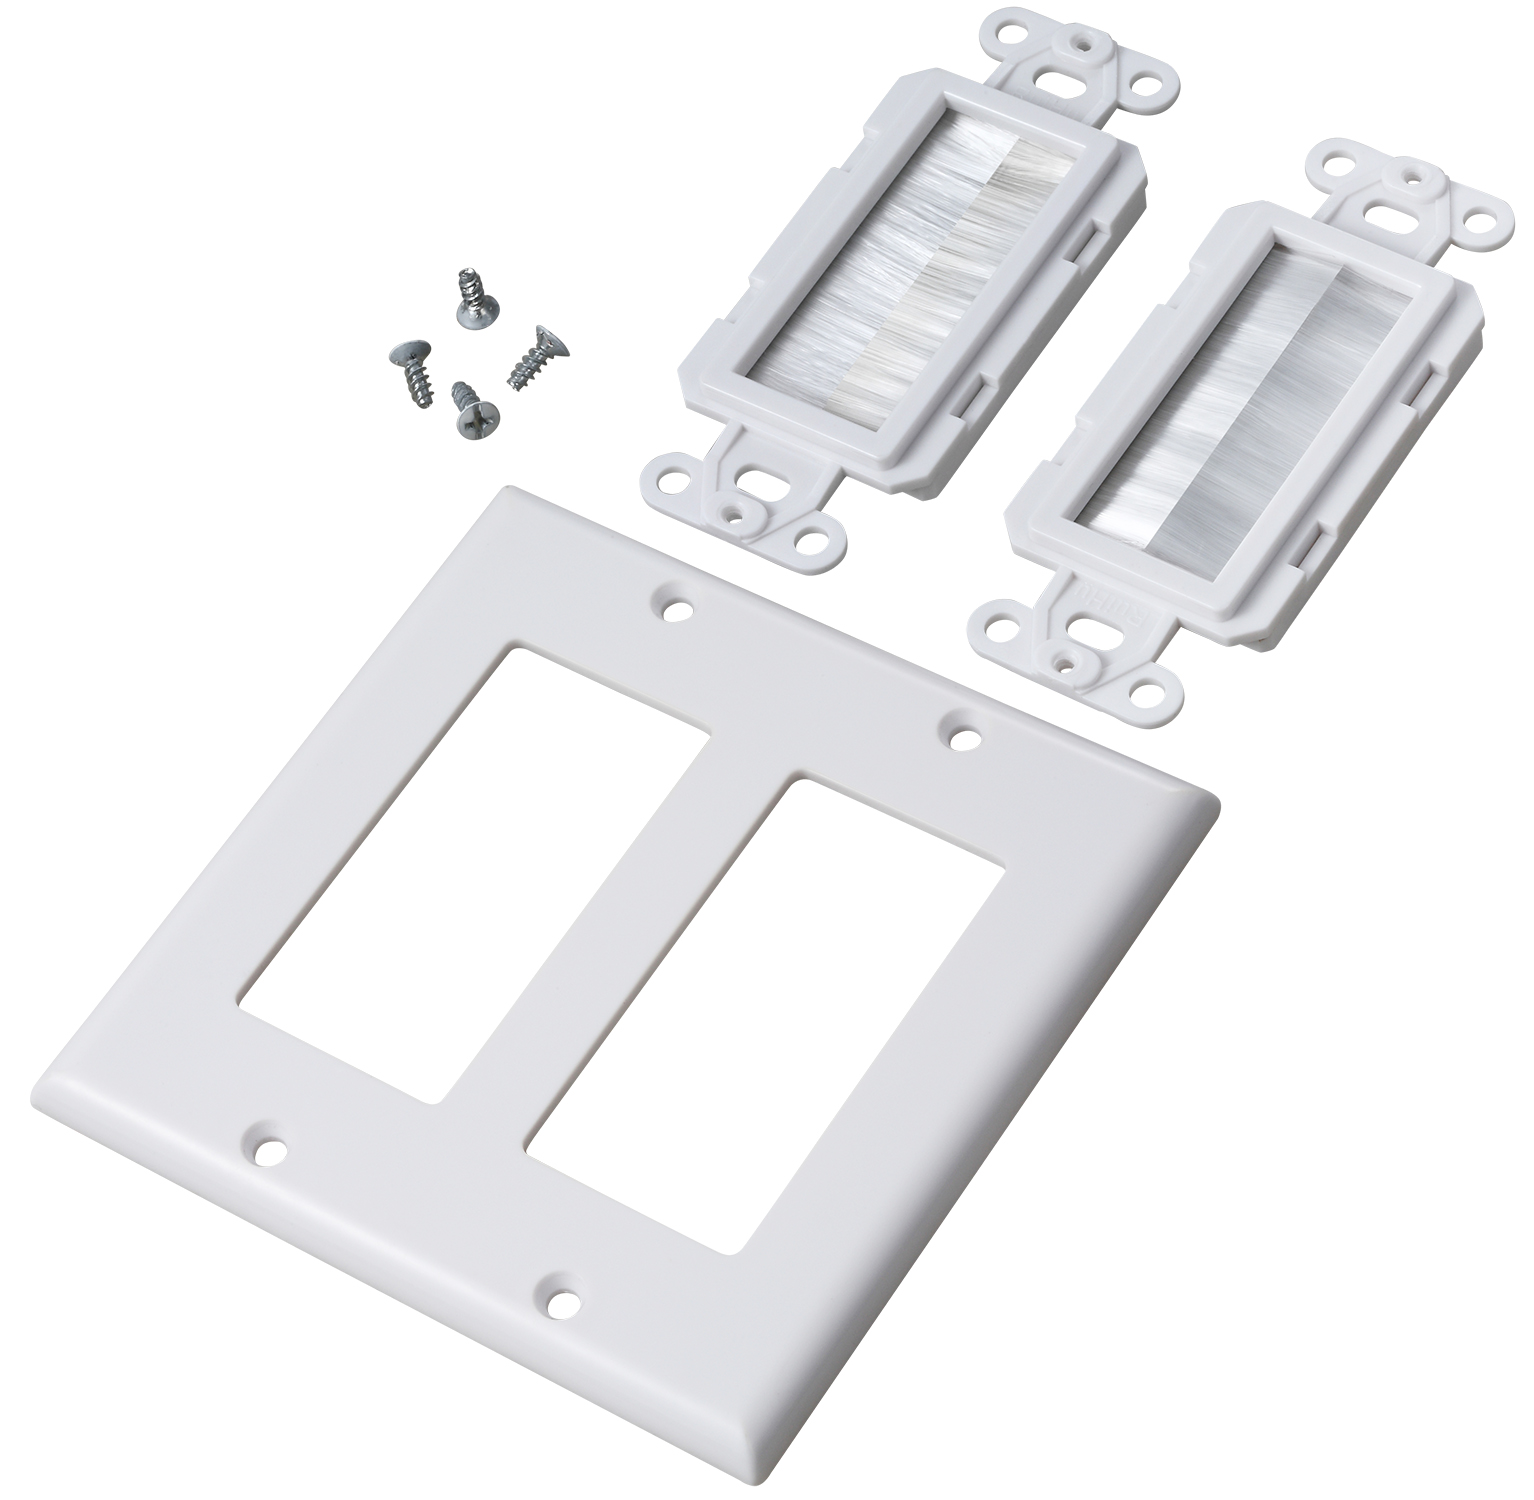 Fosmon 2-Gang Wall Plate, Brush Style Opening Passthrough Low Voltage Cable Plate in-Wall Installation for Speaker Wires, Coaxial Cables, HDMI Cables, or Network/Phone Cables - image 2 of 8